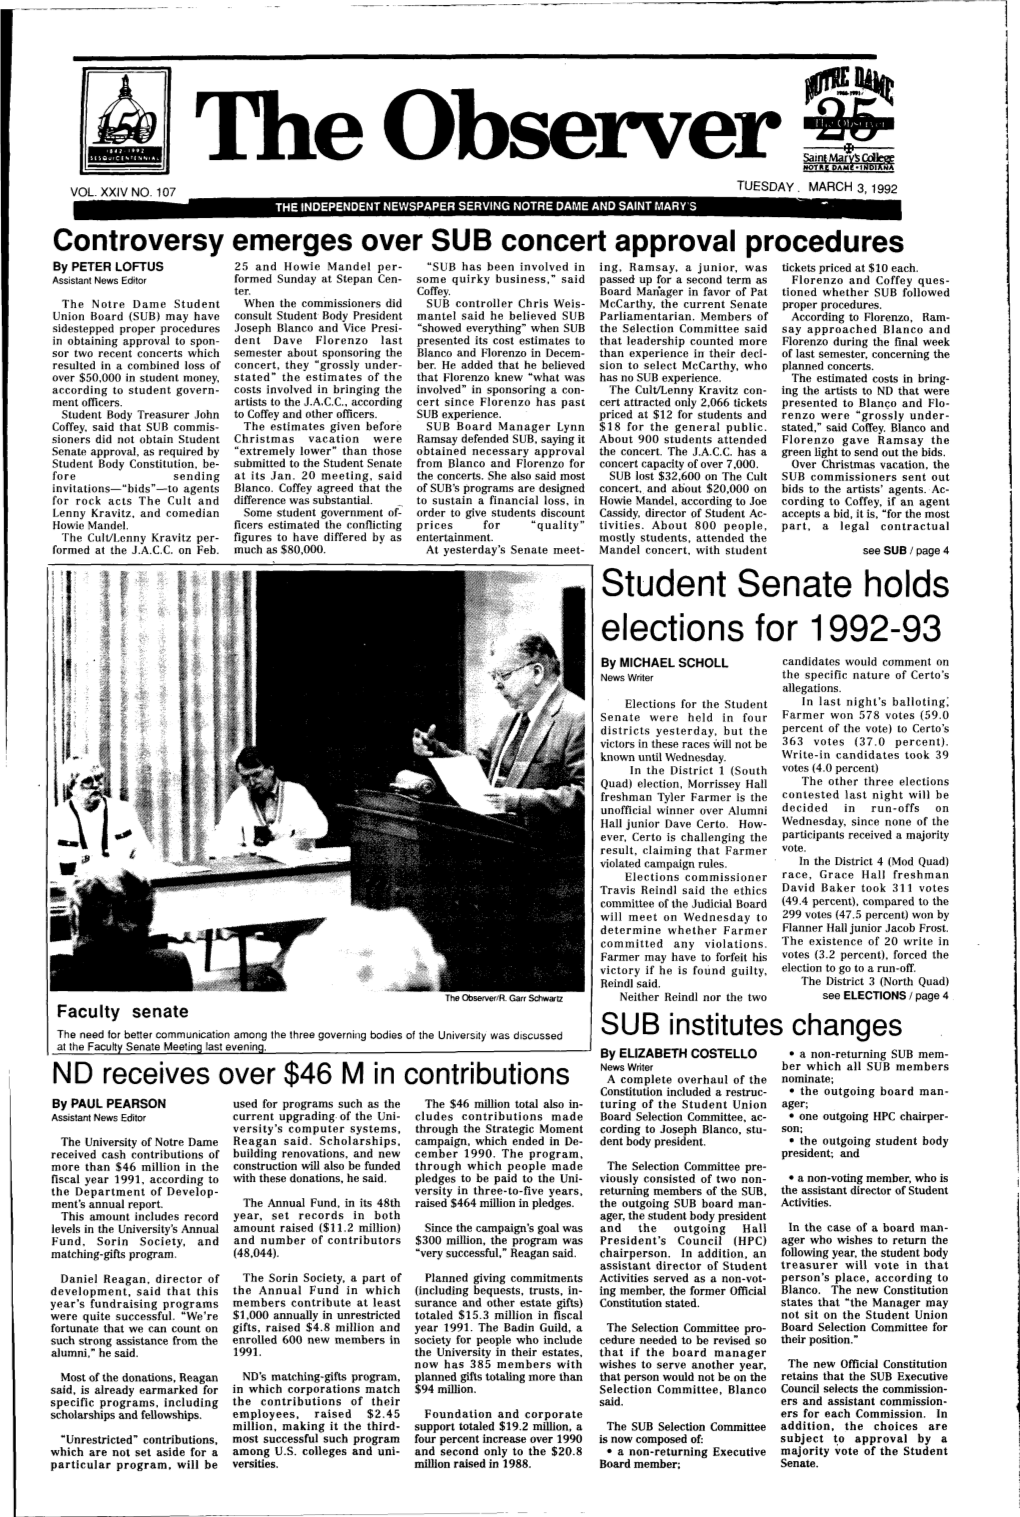 Student Senate Holds Elections for 1992-93 by MICHAEL SCHOLL Candidates Would Comment on News Writer the Specific Nature of Certo's Allegations